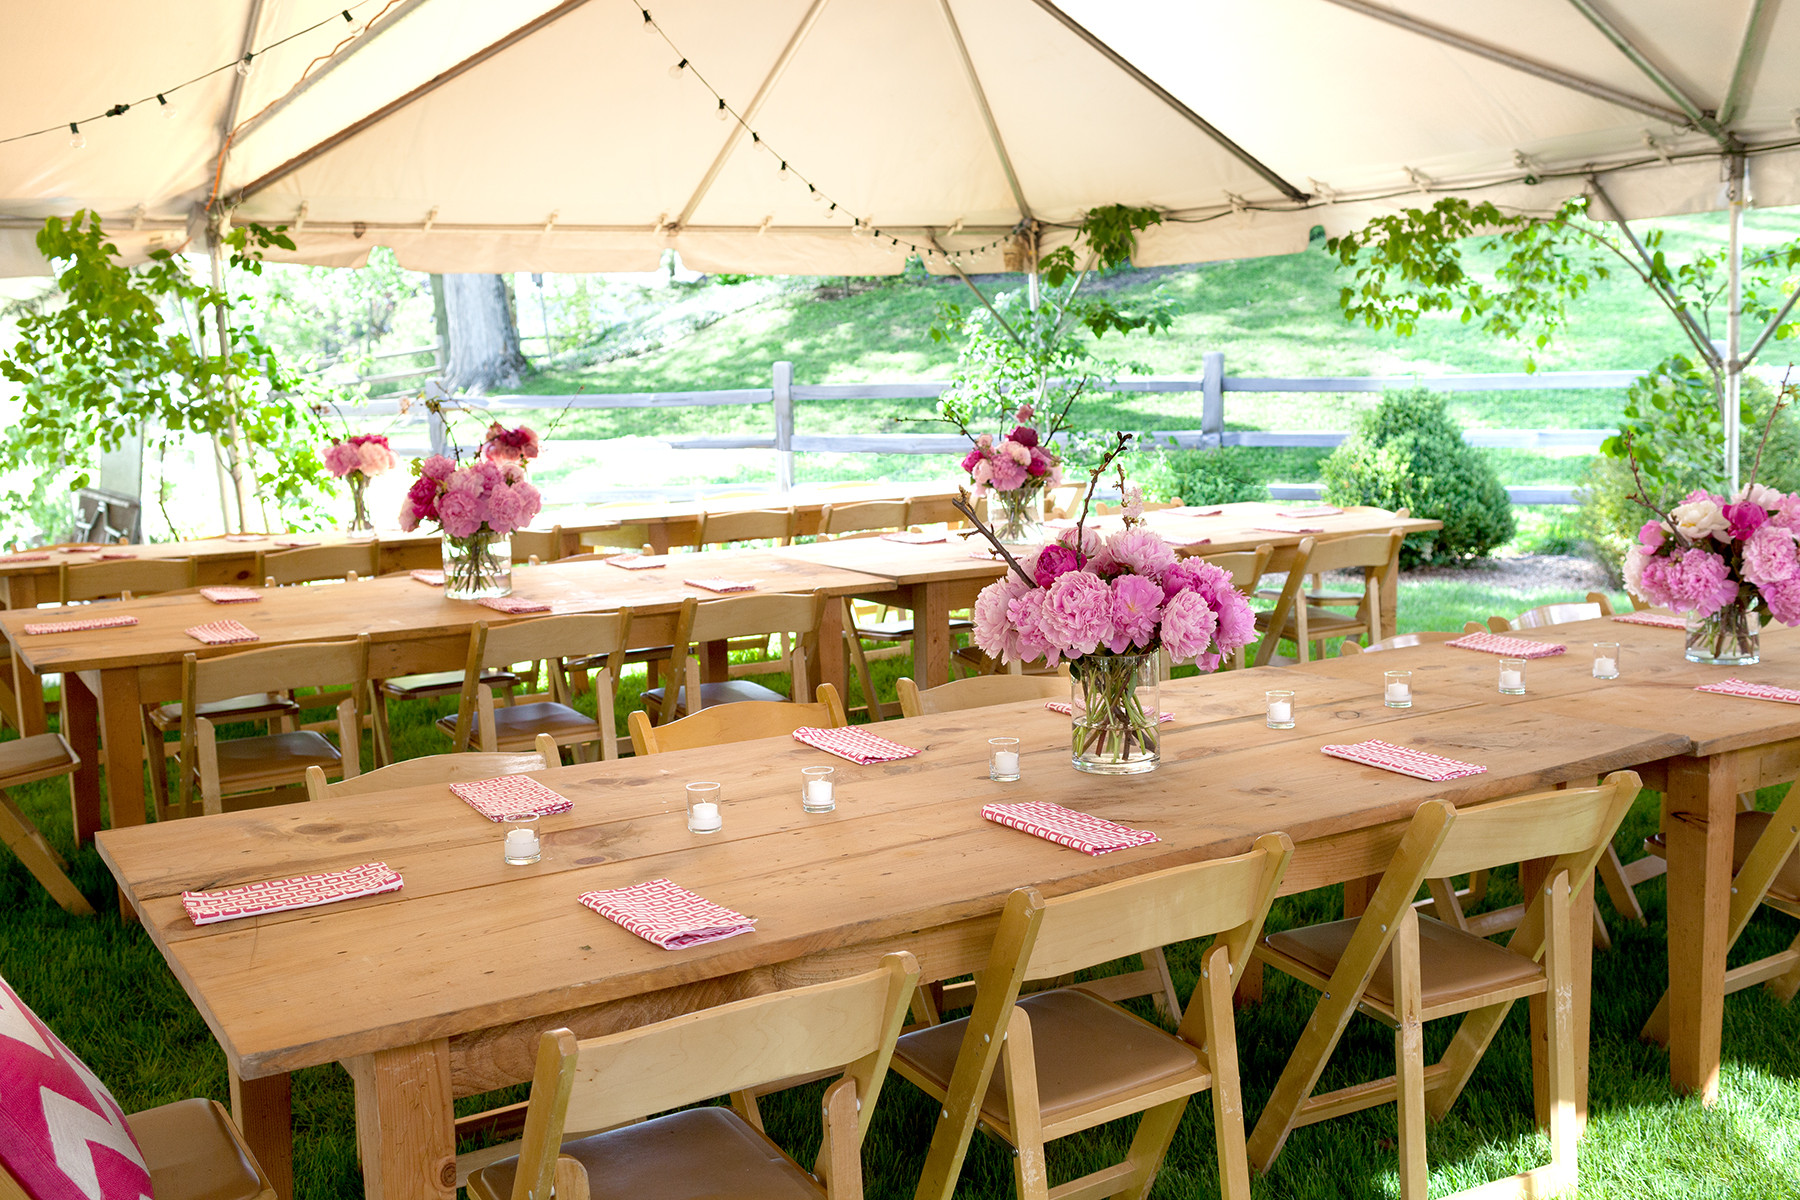 Backyard Table Ideas
 Simple Outdoor Party Decorations—for Your Table and More